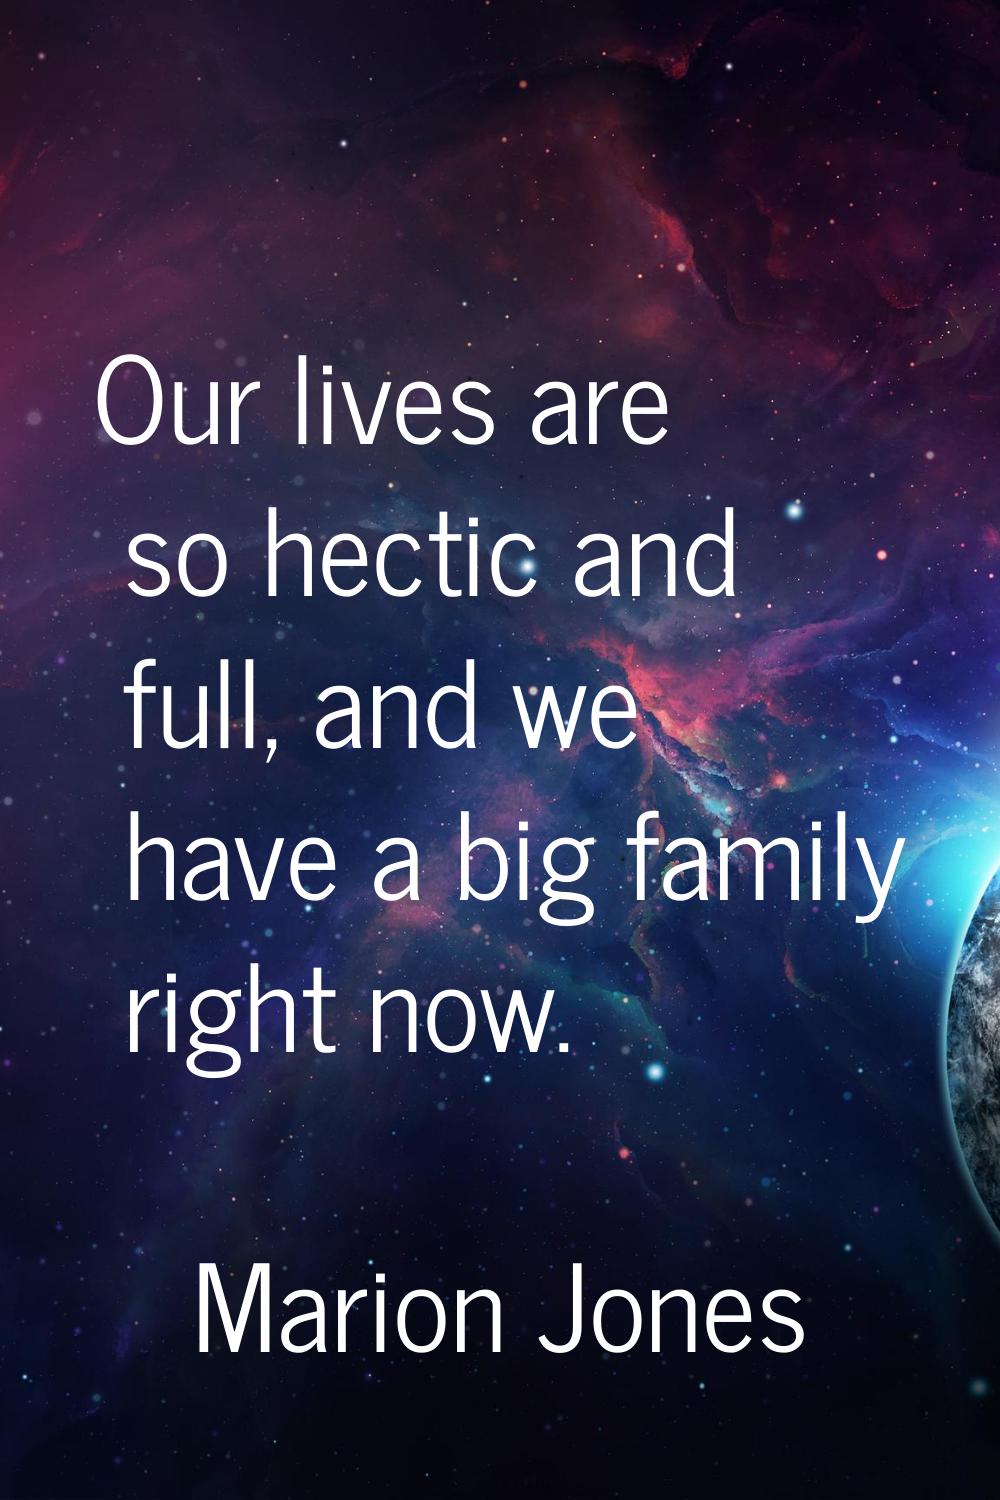 Our lives are so hectic and full, and we have a big family right now.